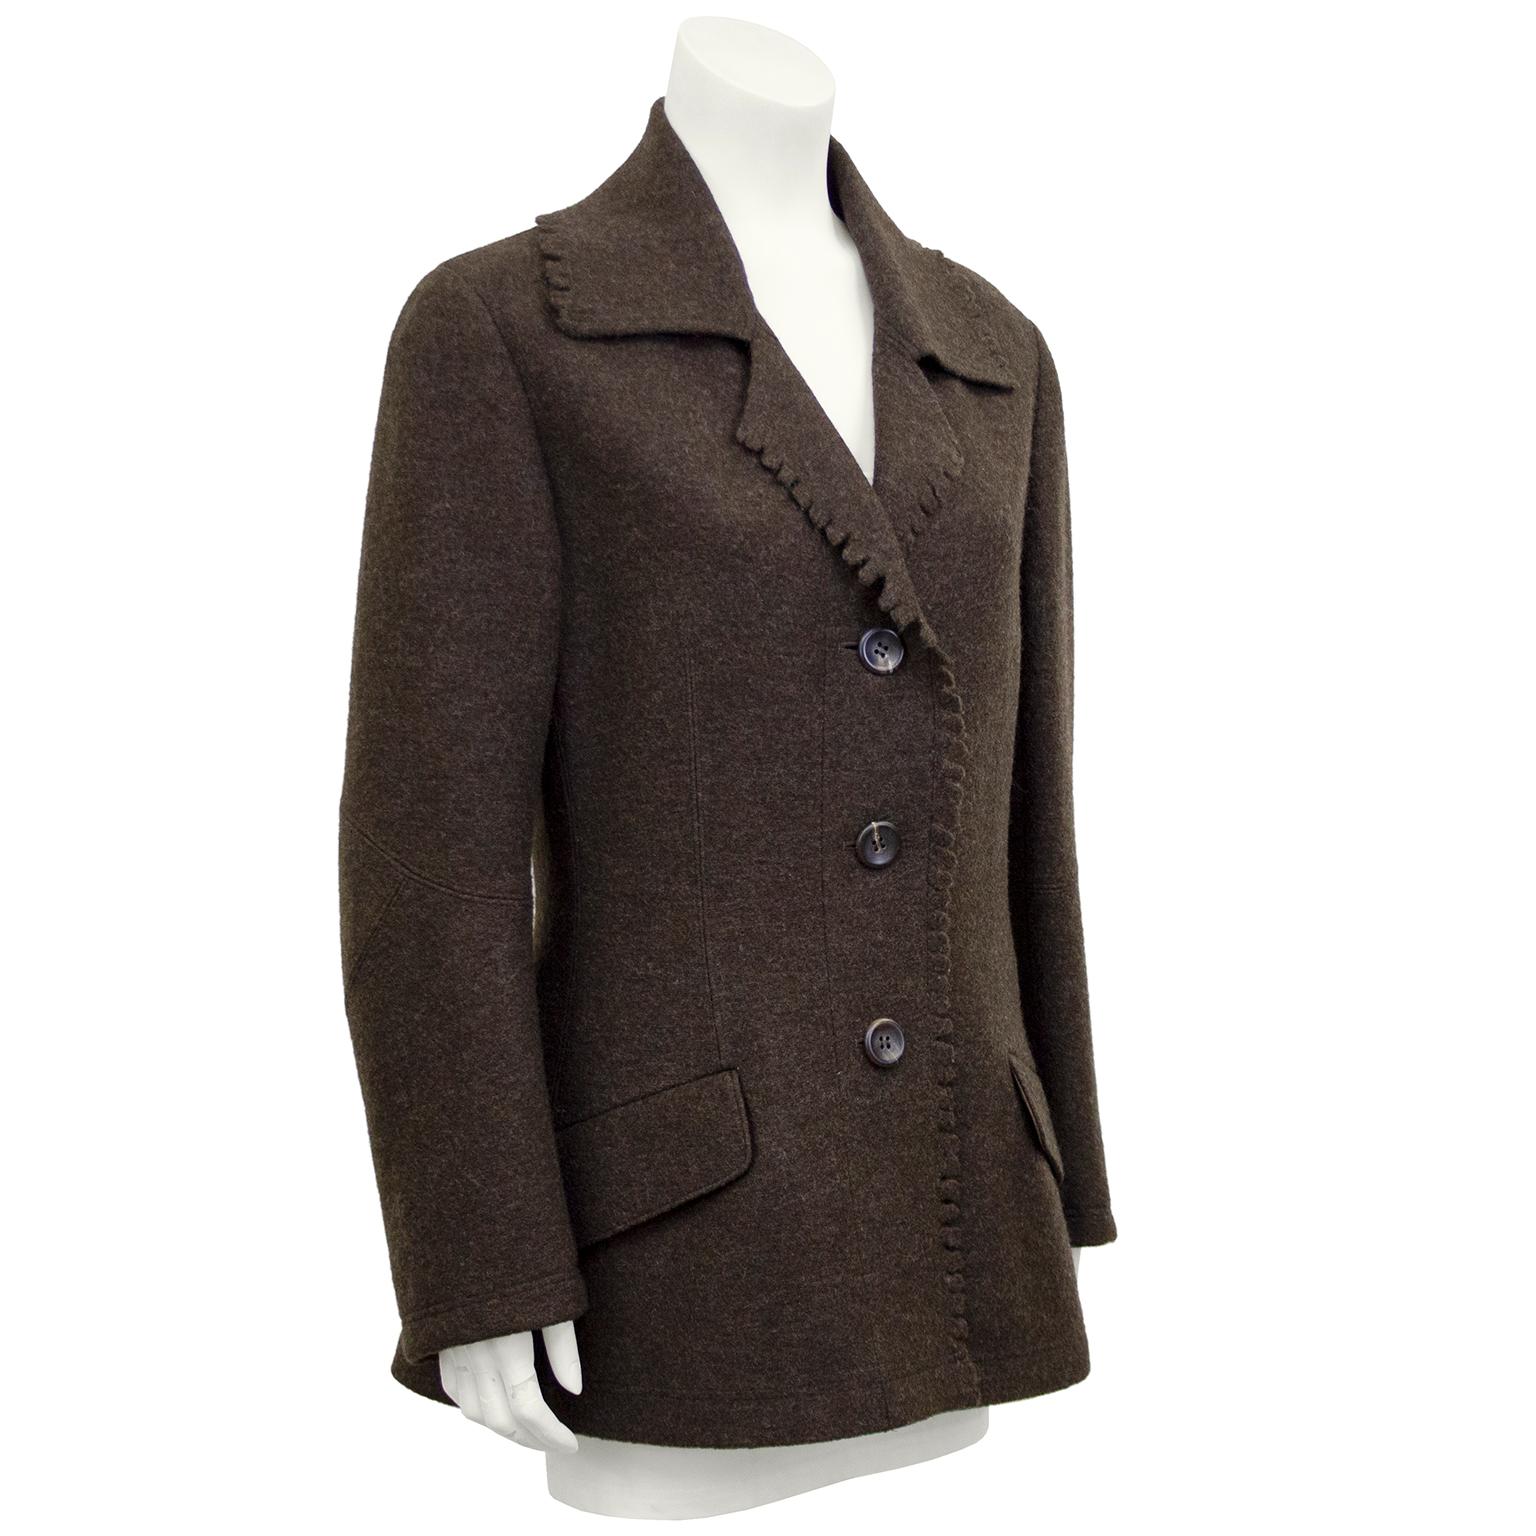 Issey Miyake coat from the 1990s. Brown felted wool with hand cut scalloped trim. Matching large brown plastic buttons. Oversize lapel. Stunning tailoring and draping with beautiful seams that slightly accentuate the waist. Slanted flap pockets.